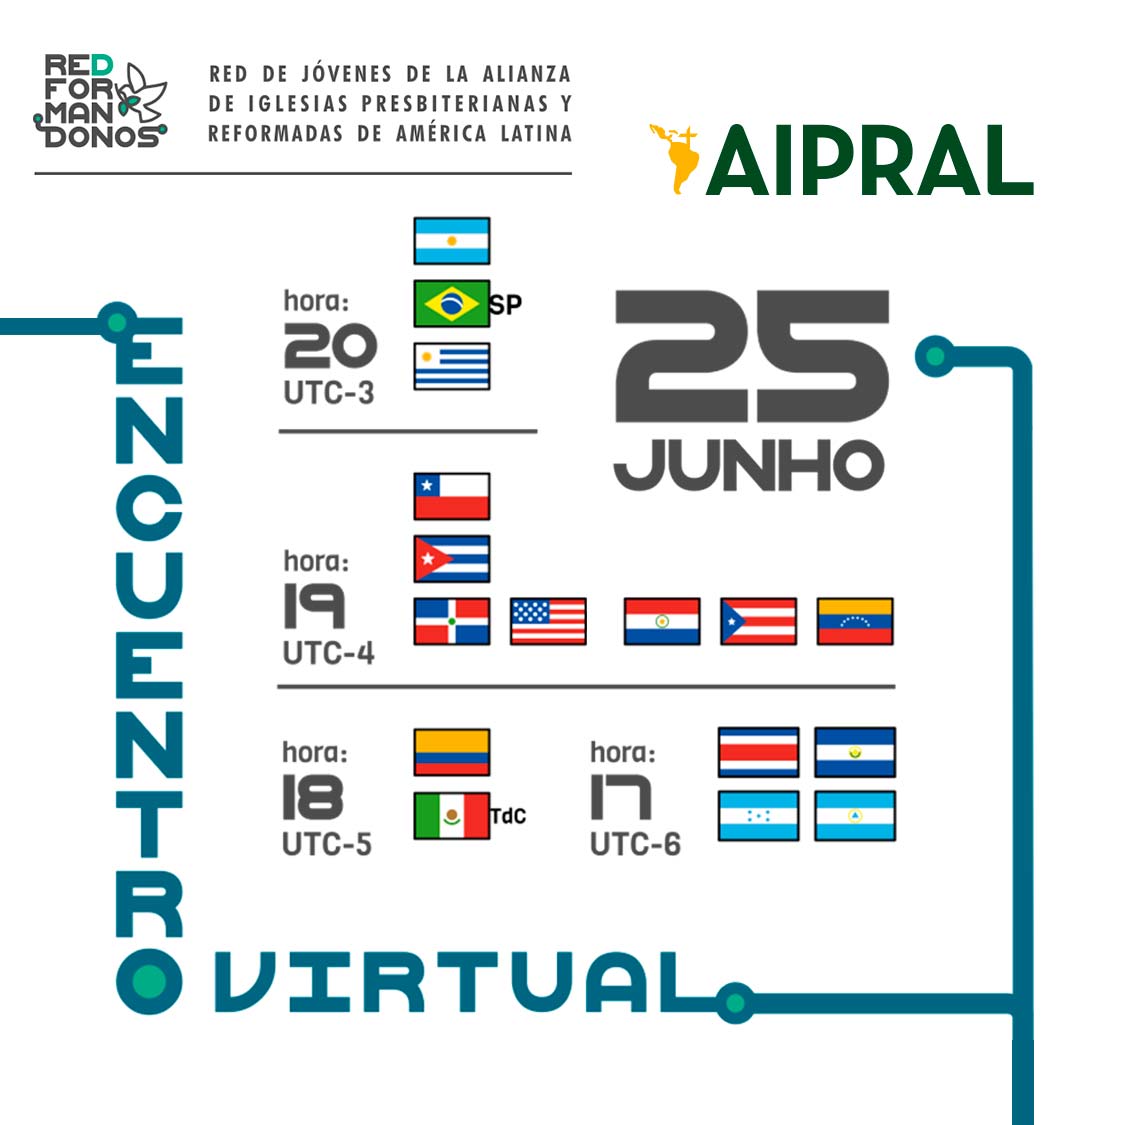 66.2021 - AIPRAL